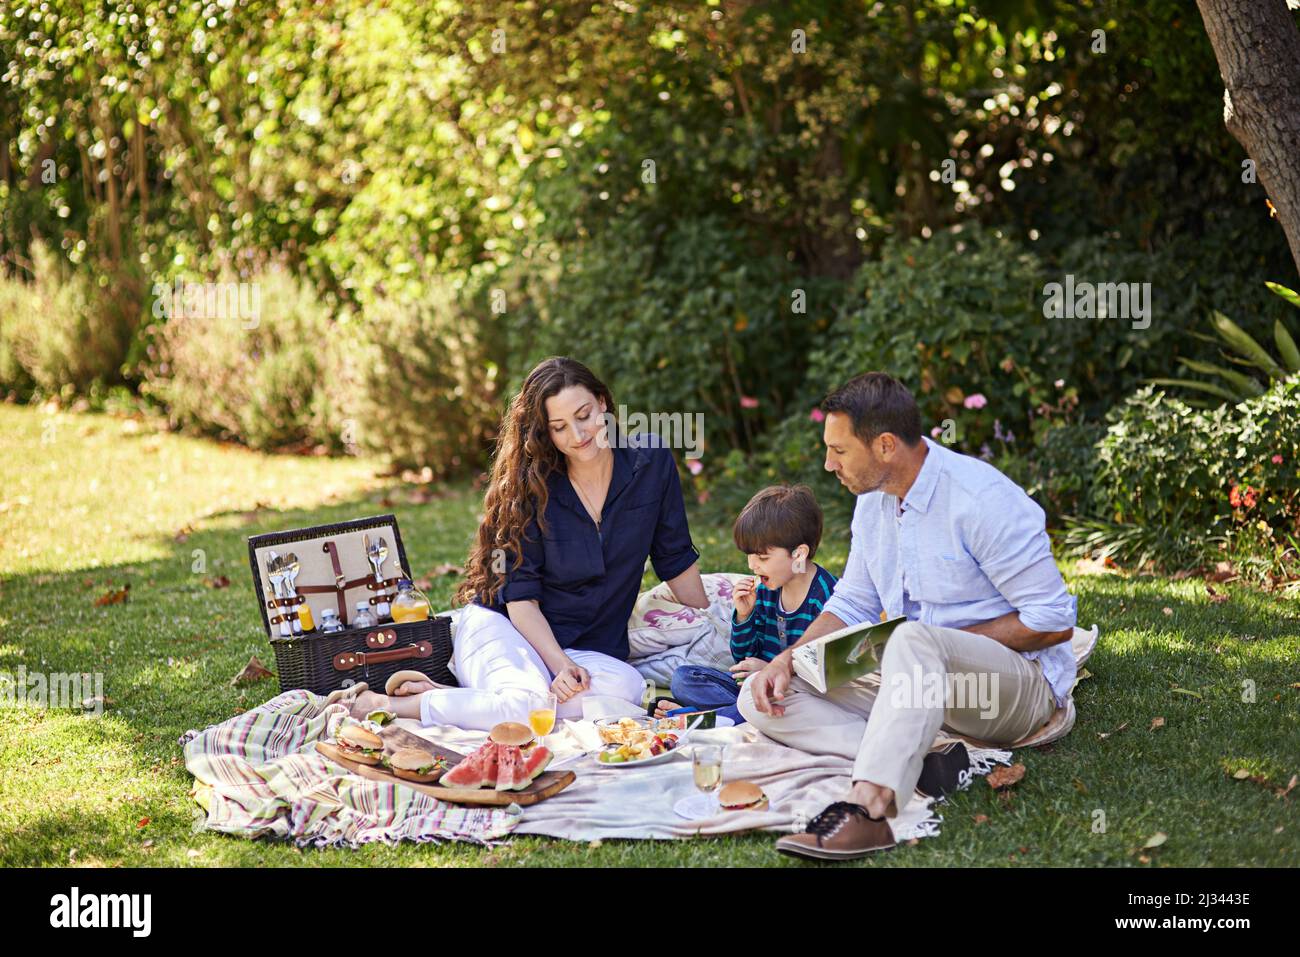 Family picnics are the best. Shot of a family enjoying a picnic together. Stock Photo